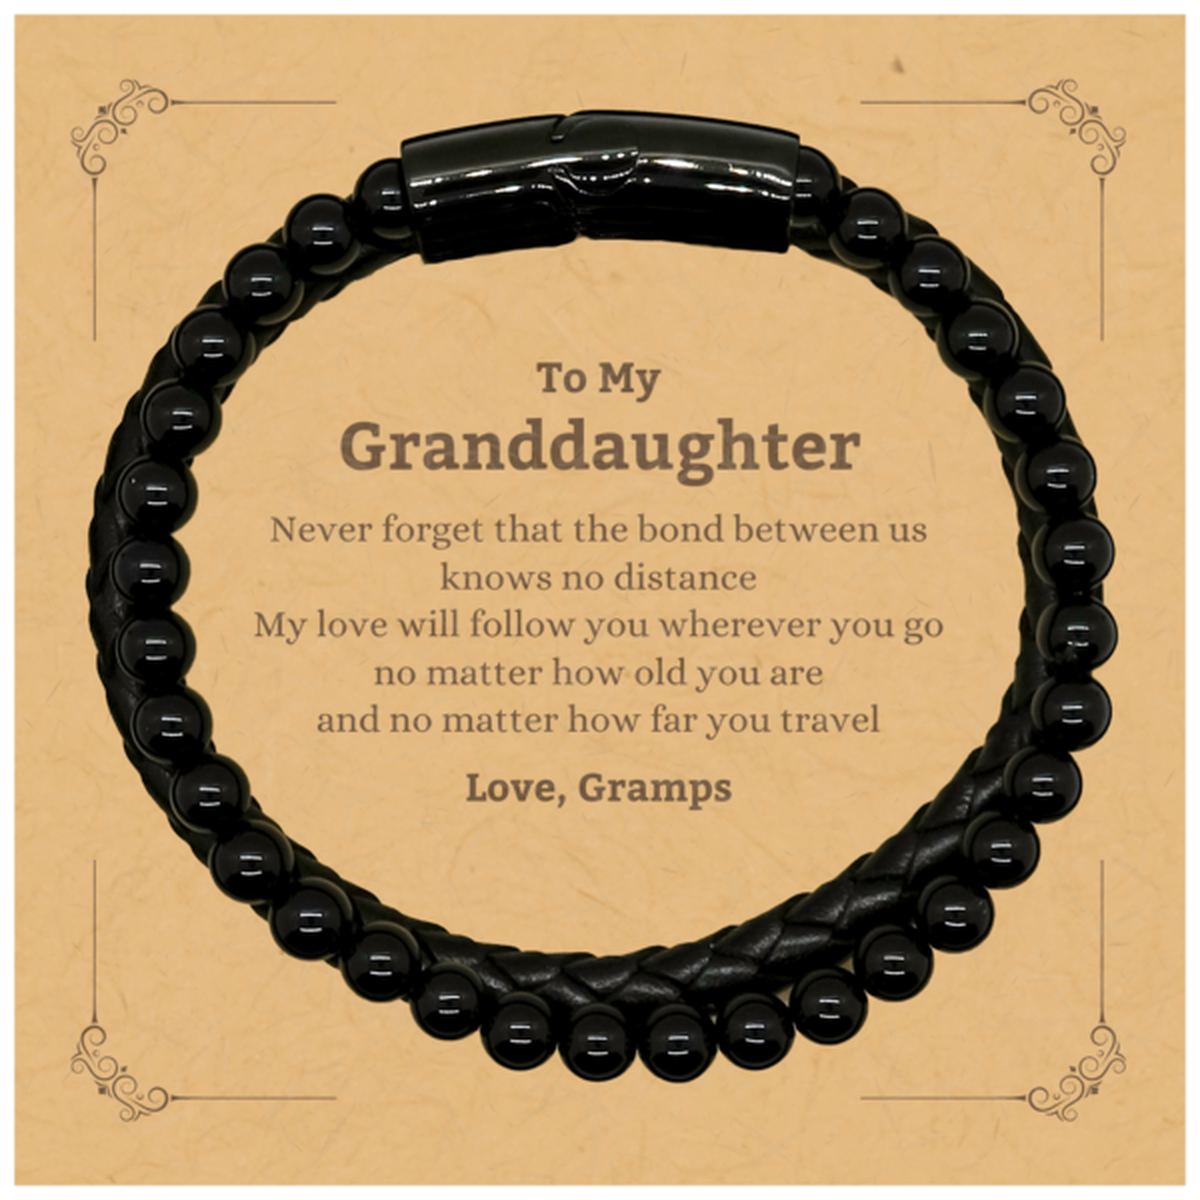 Granddaughter Birthday Gifts from Gramps, Adjustable Stone Leather Bracelets for Granddaughter Christmas Graduation Unique Gifts Granddaughter Never forget that the bond between us knows no distance. Love, Gramps